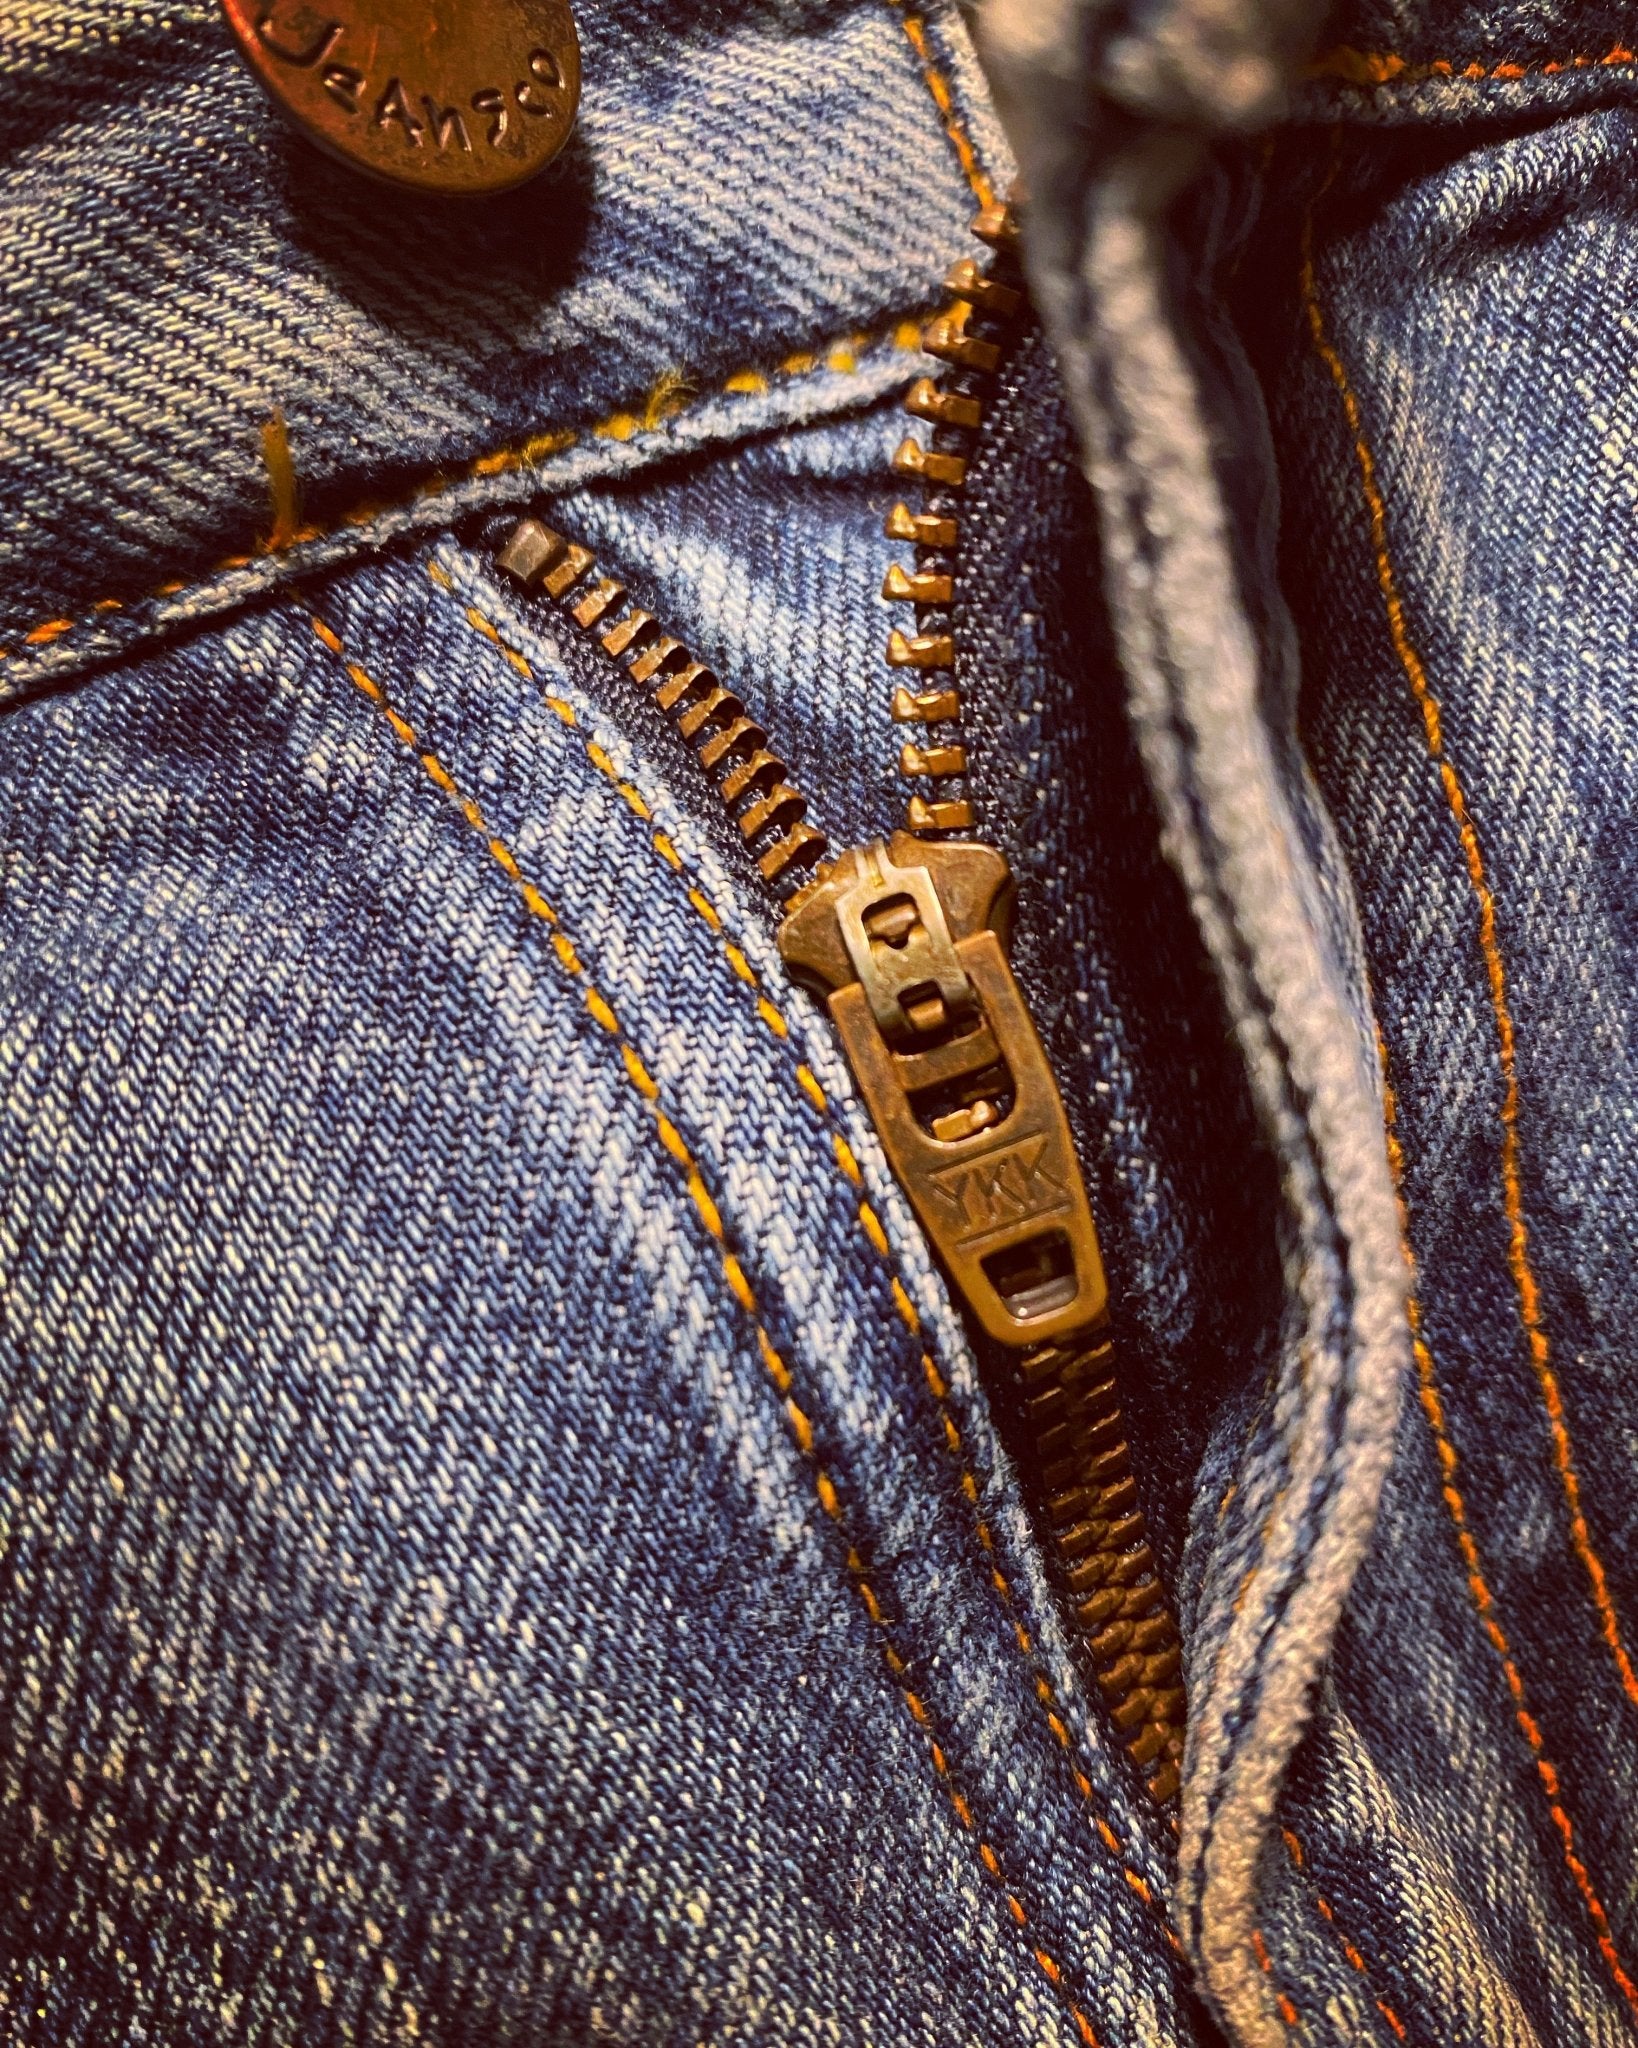 How to fix a zipper on jeans, replace the zip in a pair of jeans